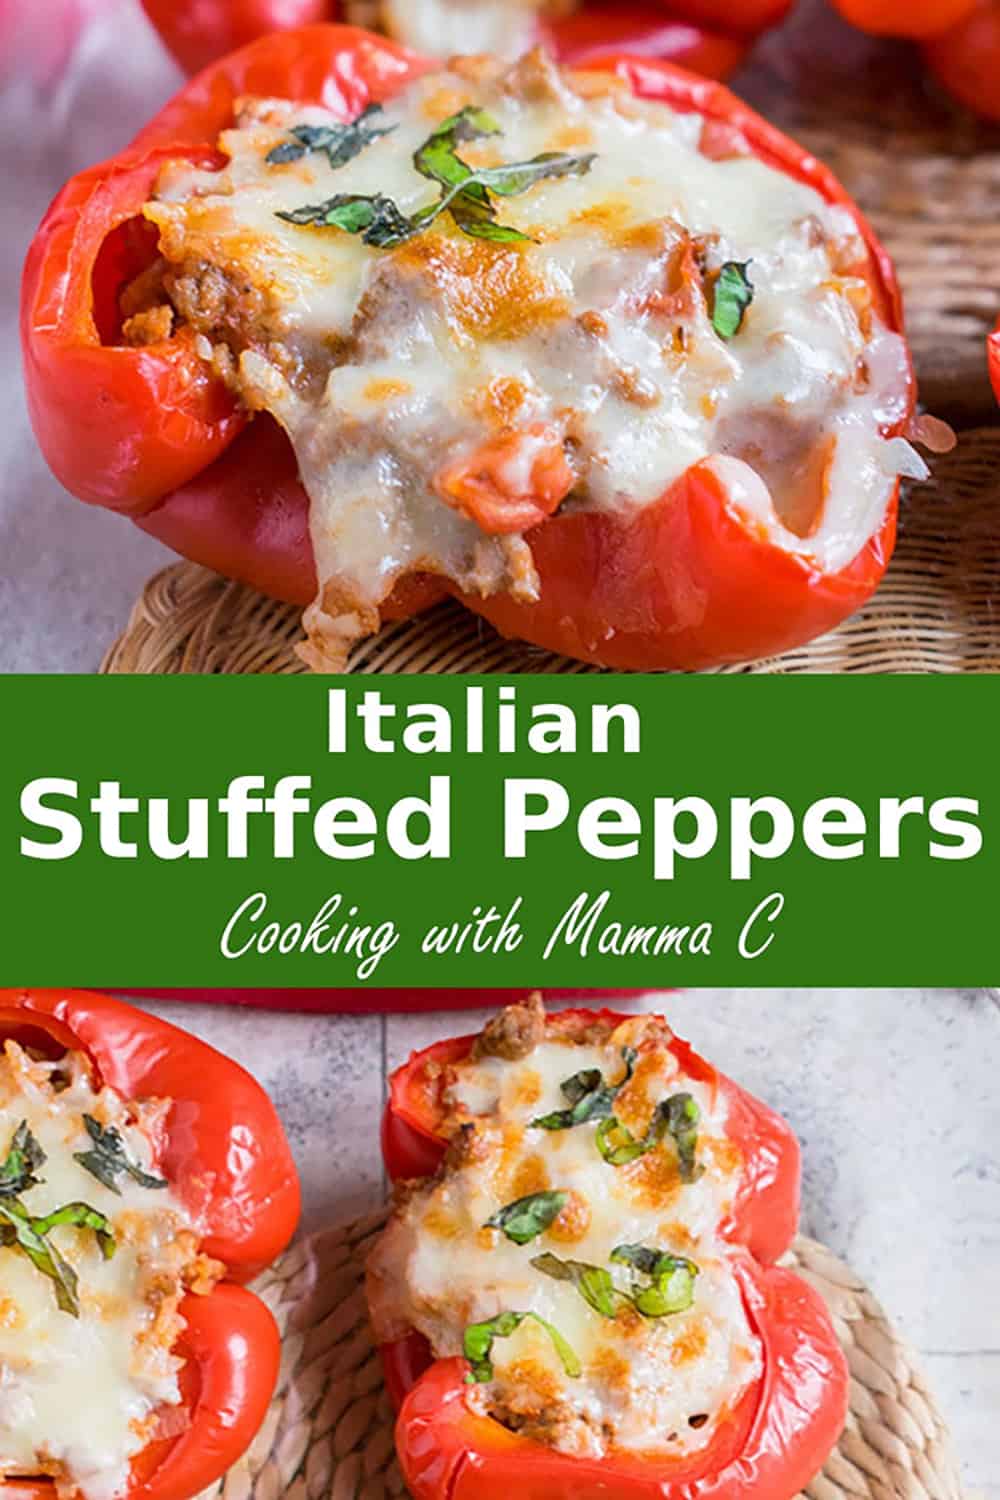 Italian Stuffed Peppers - Cooking with Mamma C